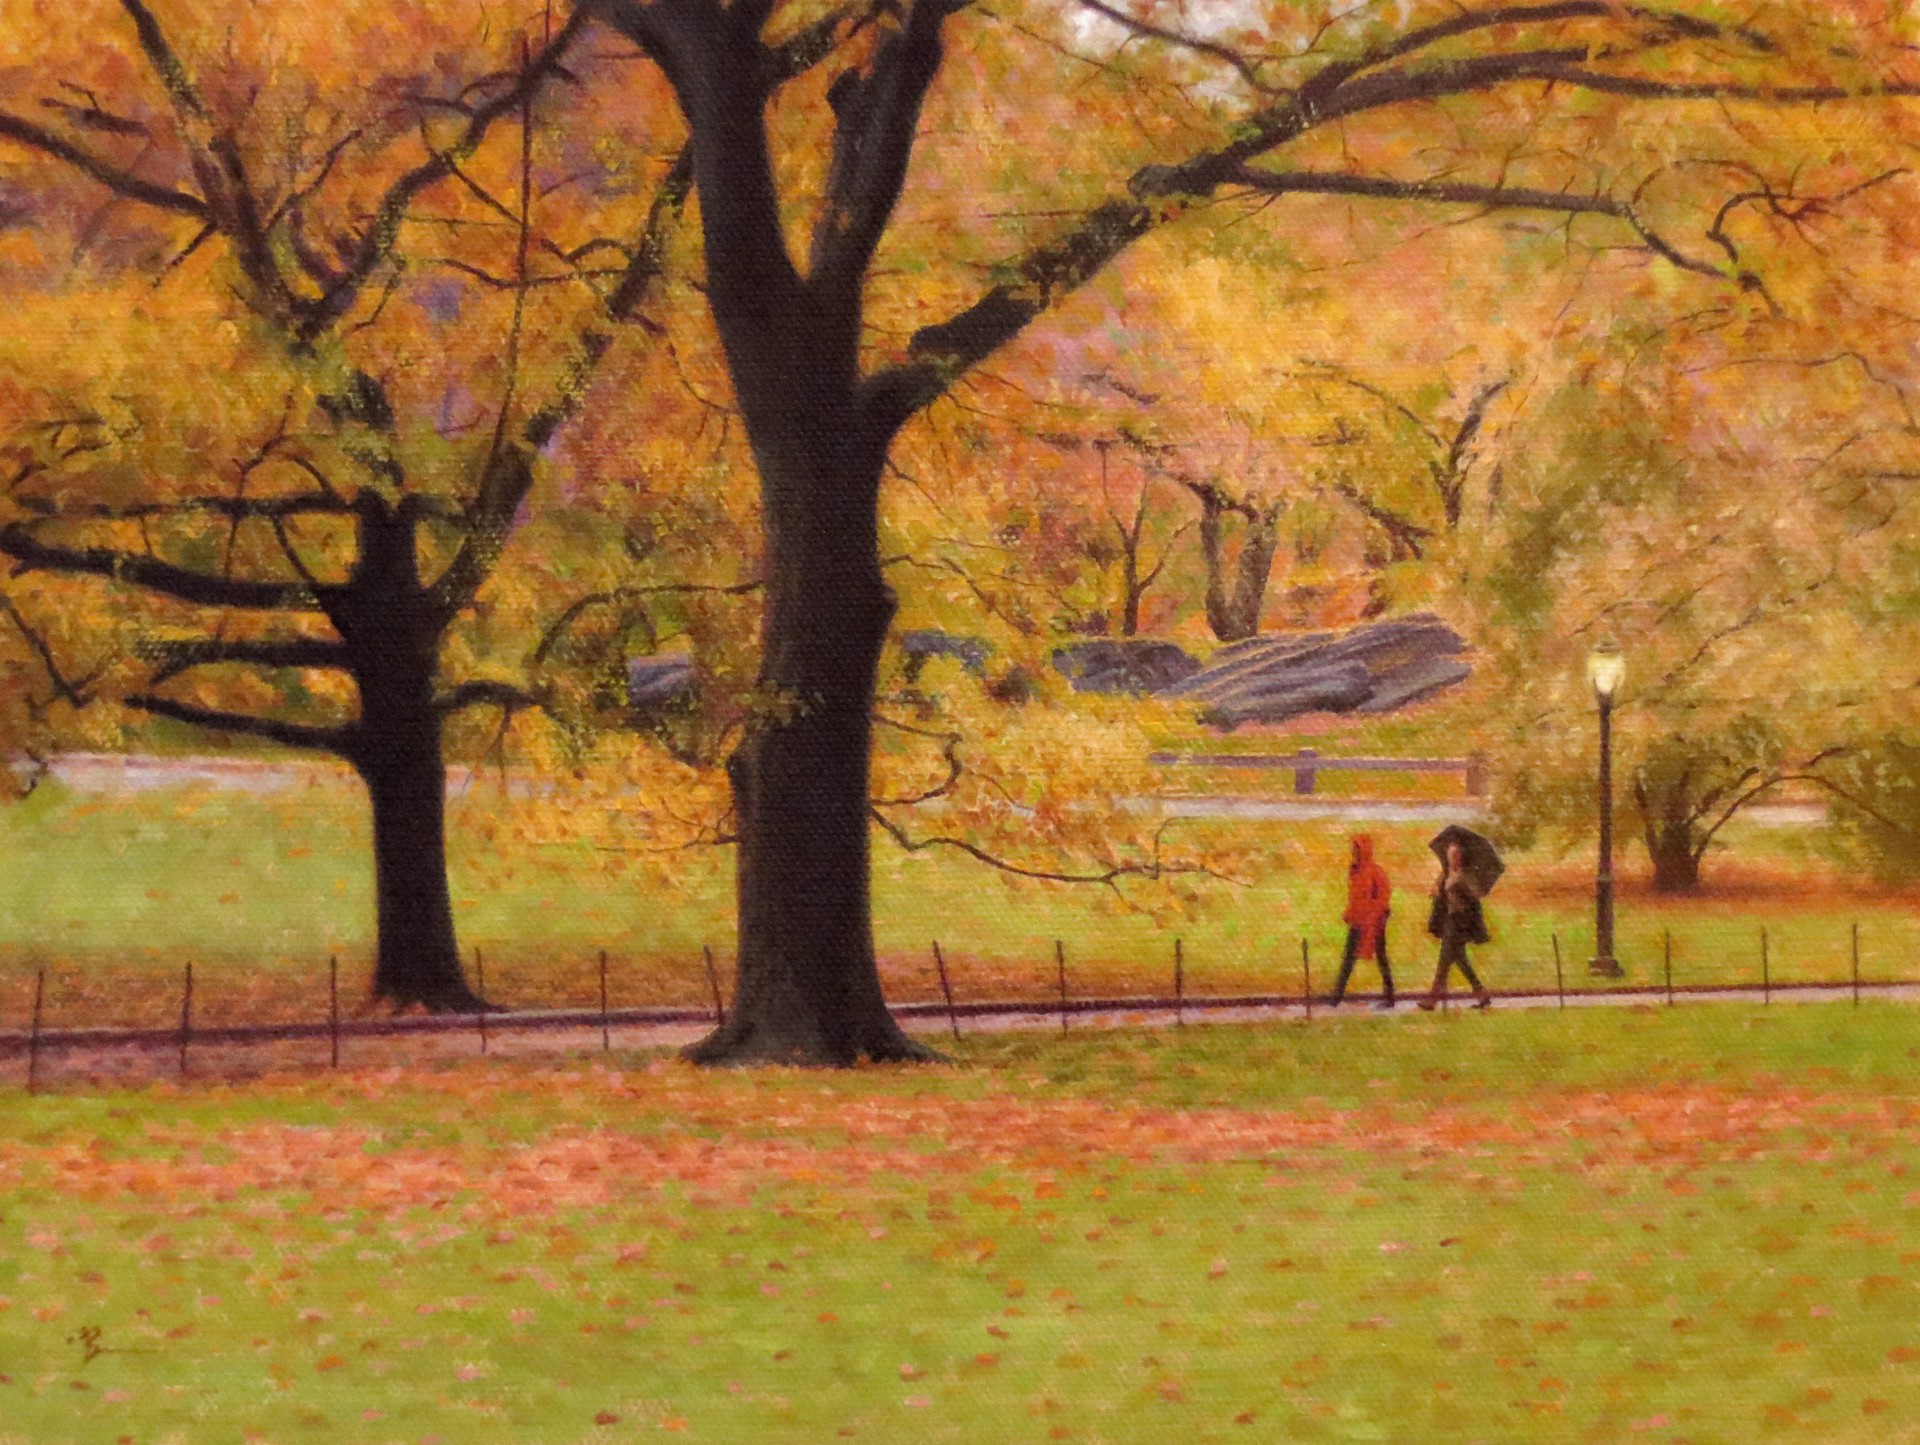 Rainy Afternoon, Central Park by Dan Brown